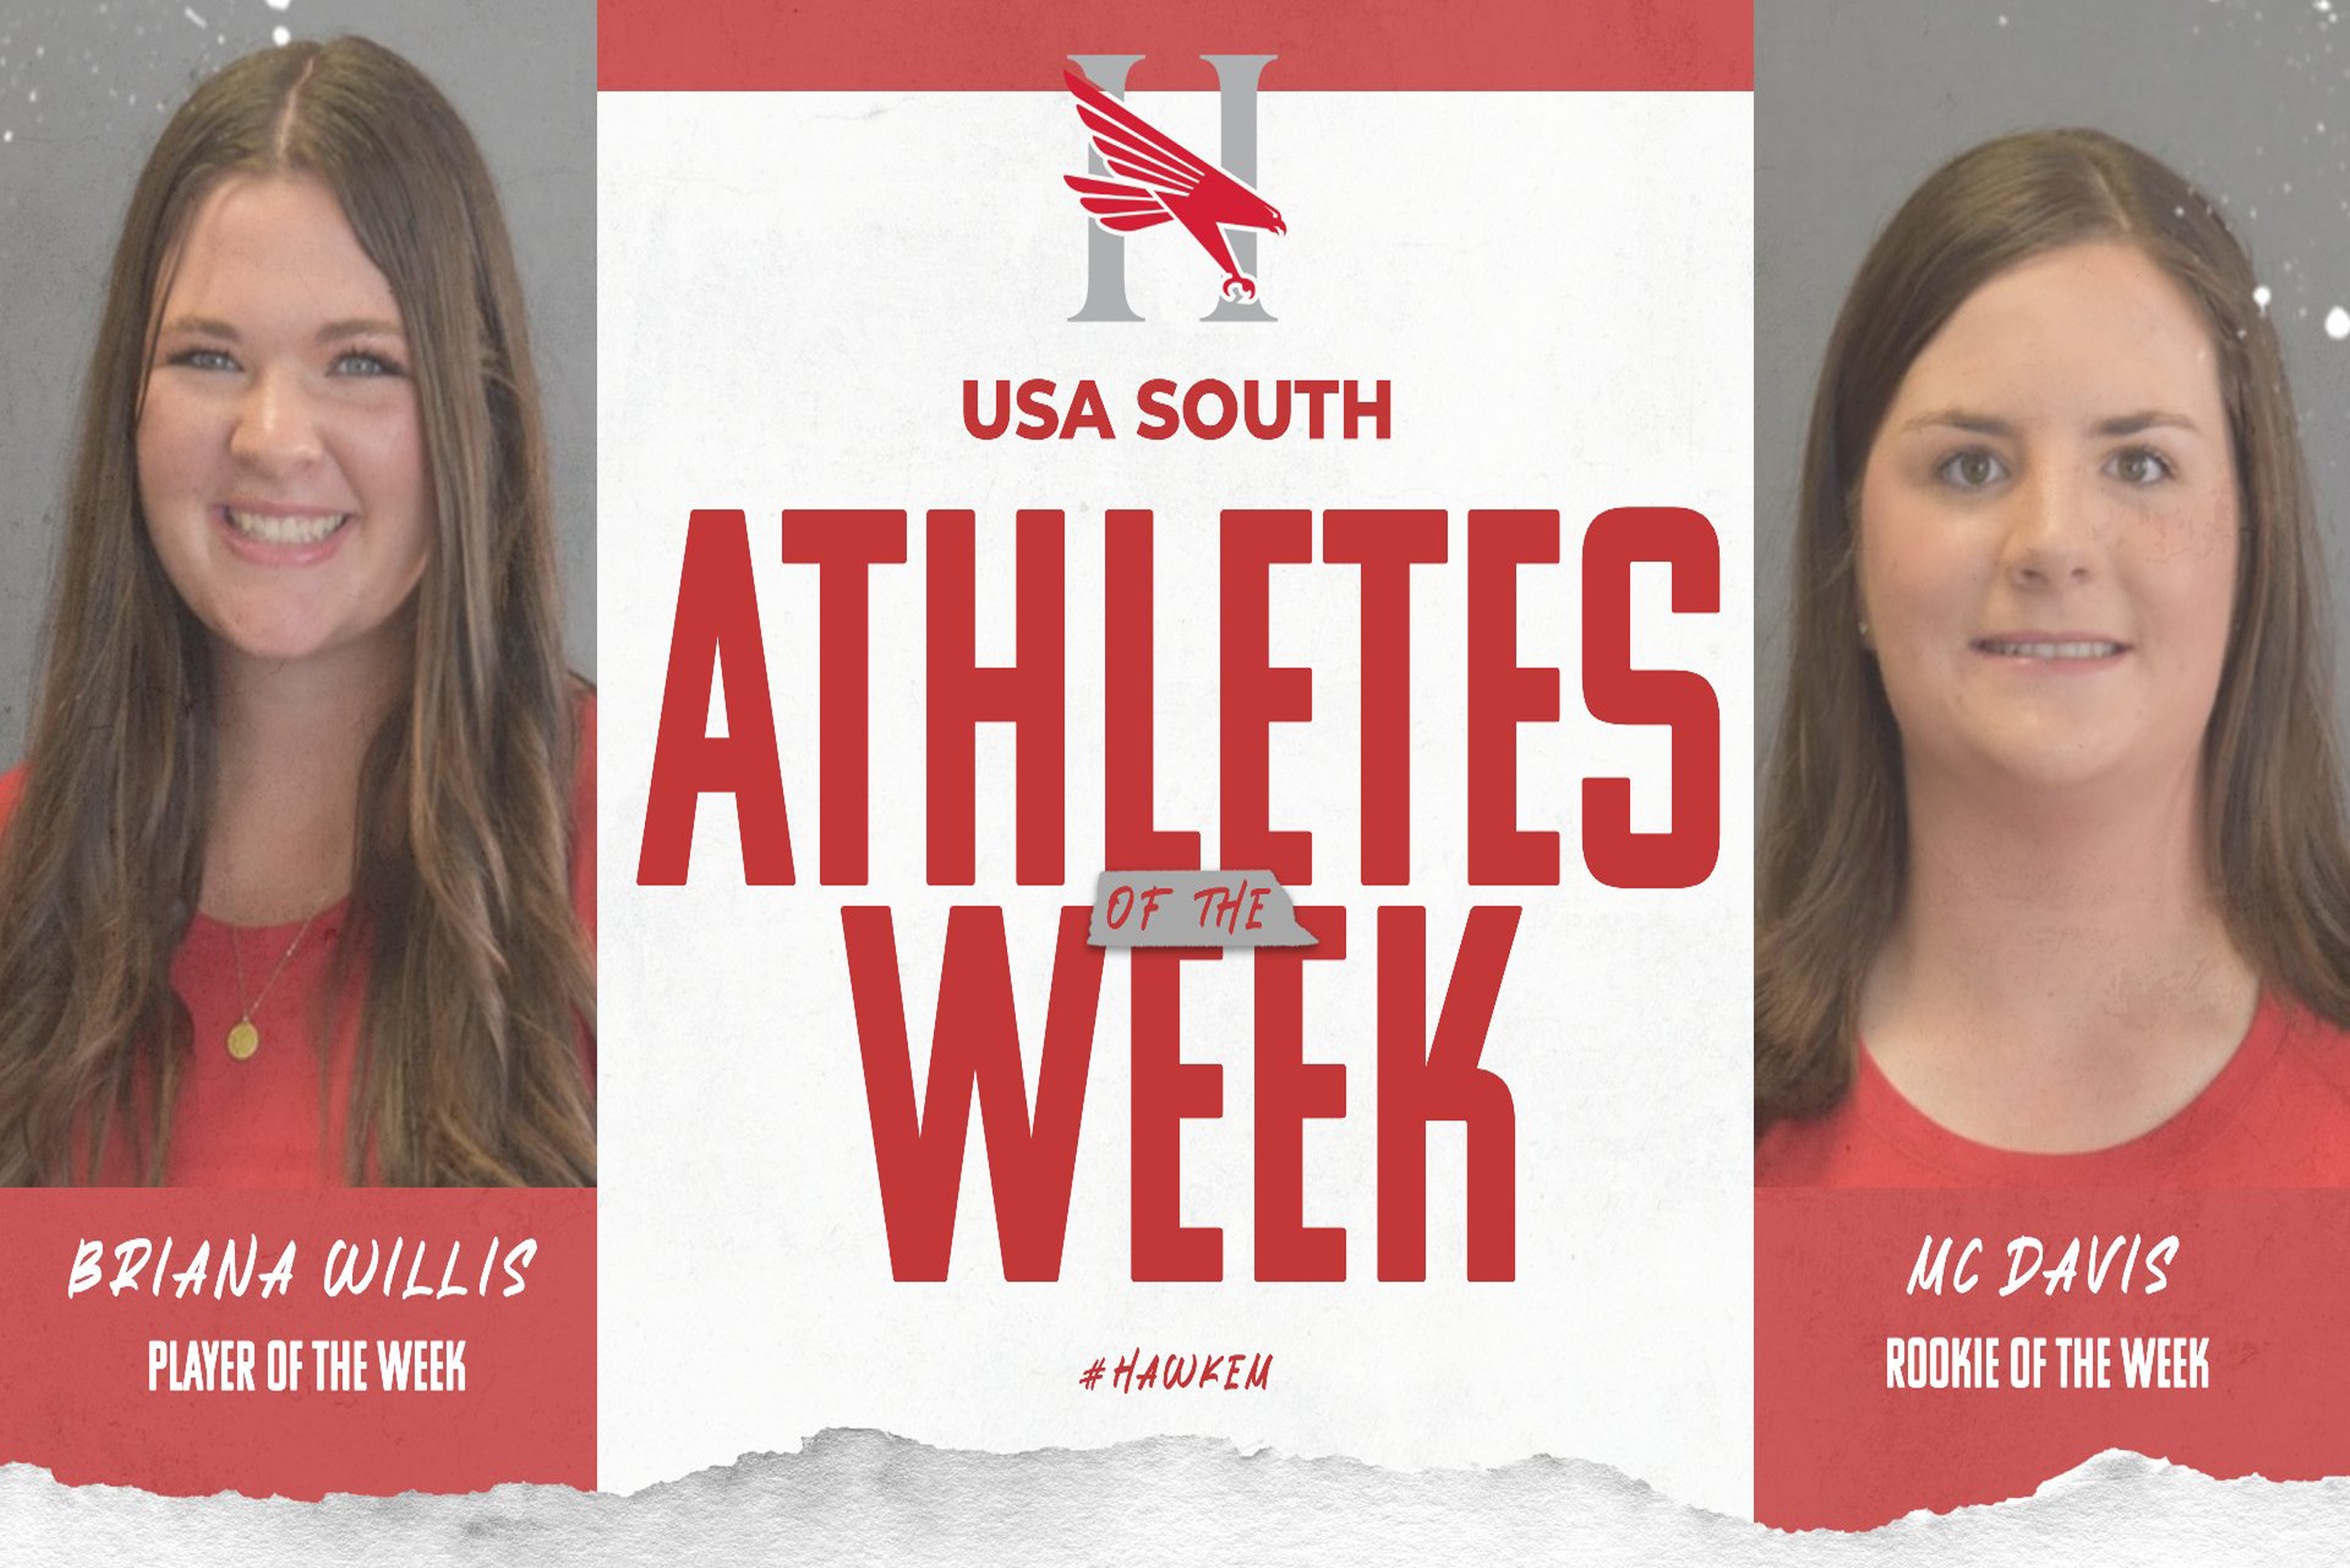 Women's Golf Dominates USA South Athletes of the Week